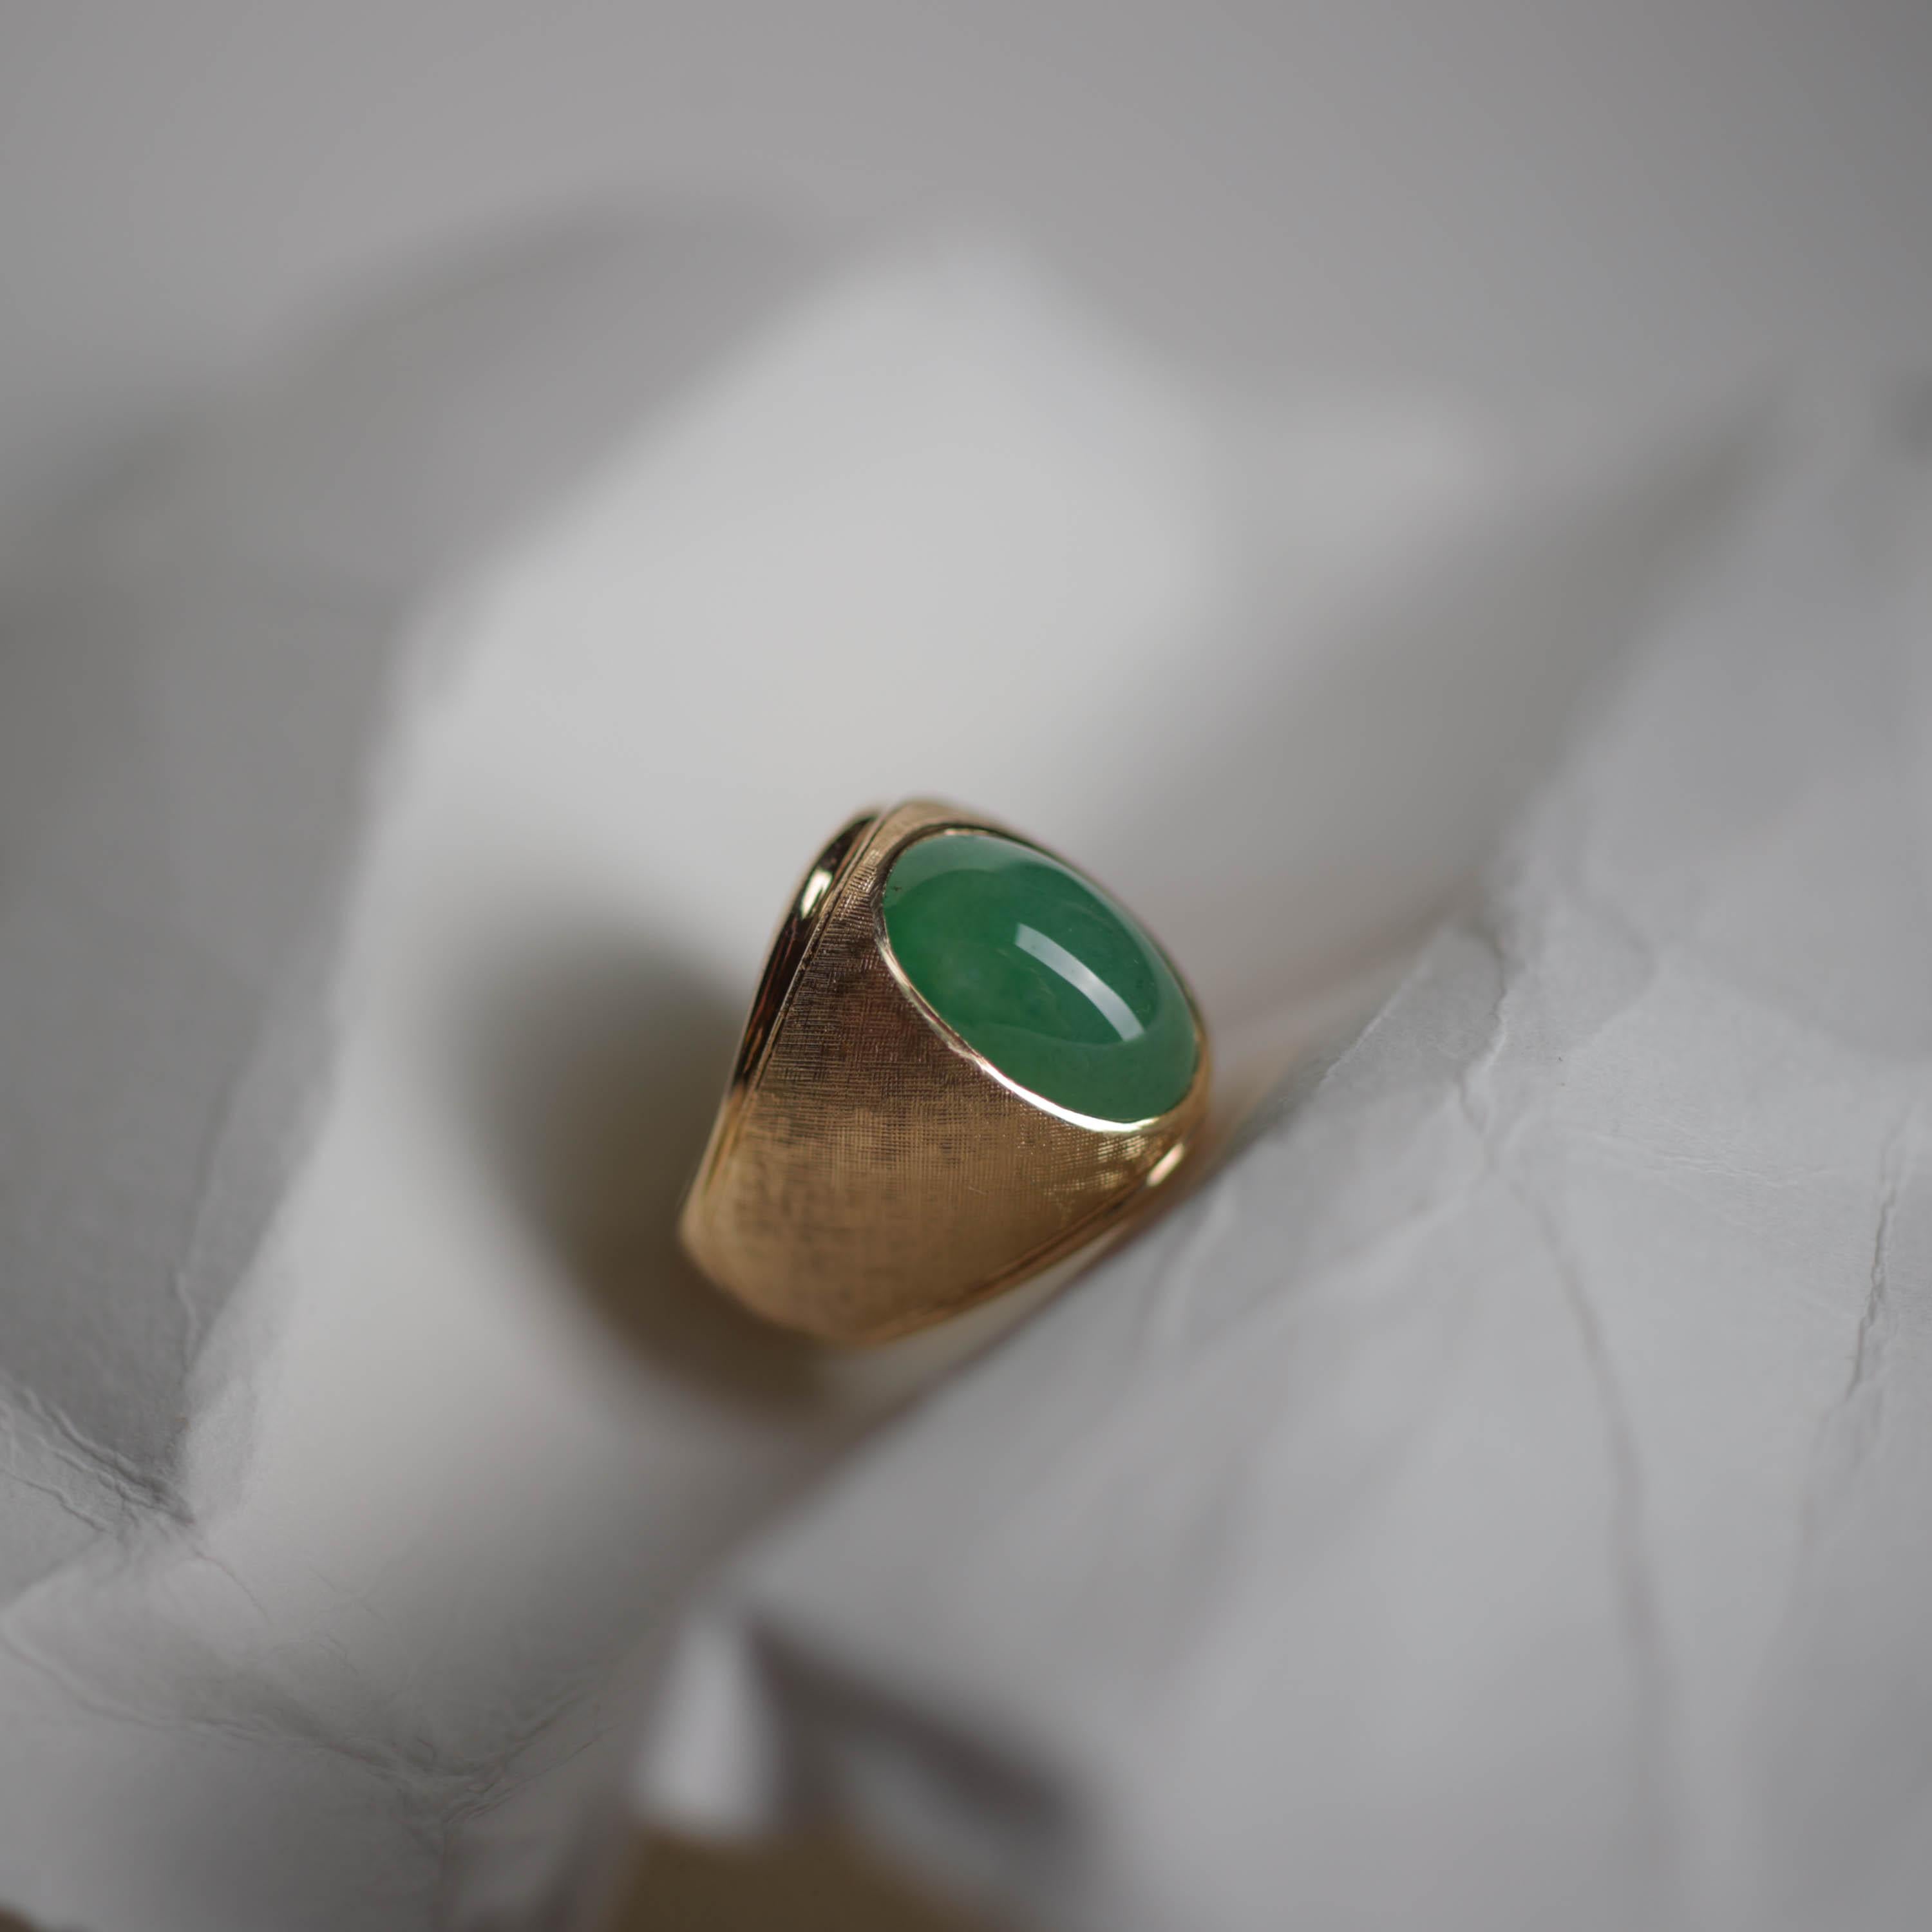 Cabochon Glassy Jade Ring Midcentury Highly Translucent Certified Untreated Size 10